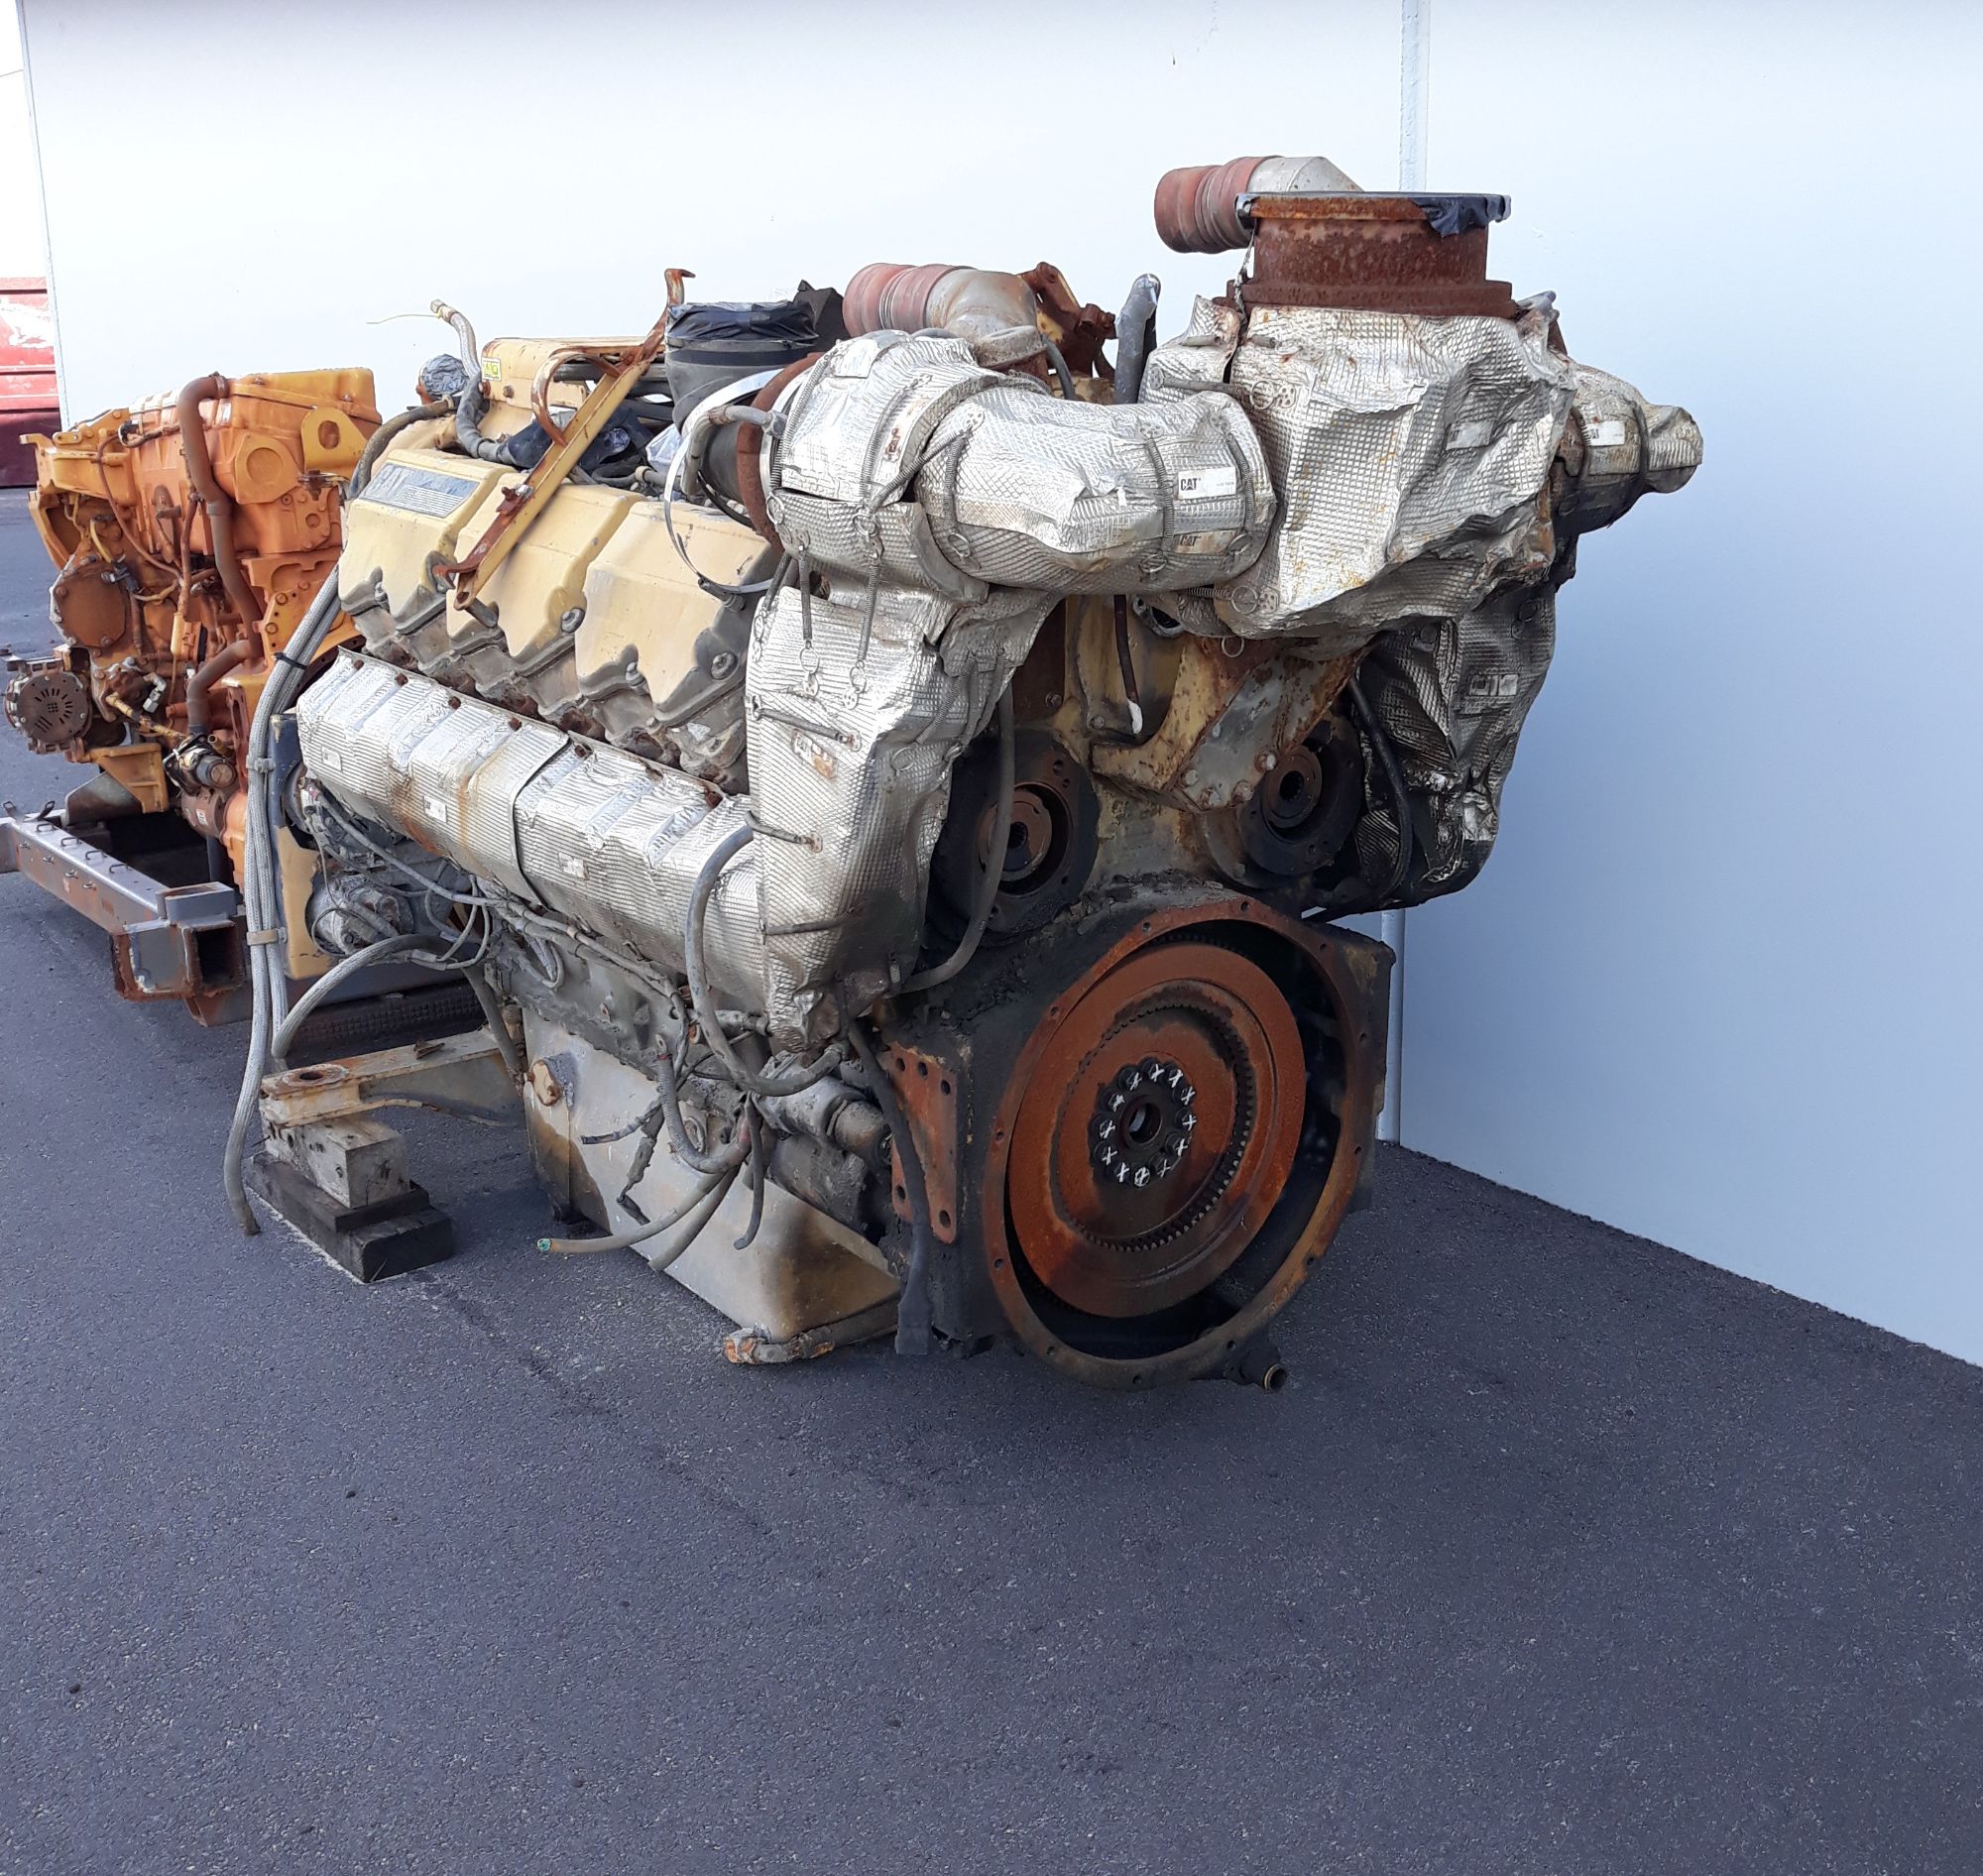 CaterpillarÂ® C27 AD55 Engines dismantled and used parts now available for sale throughout Australia